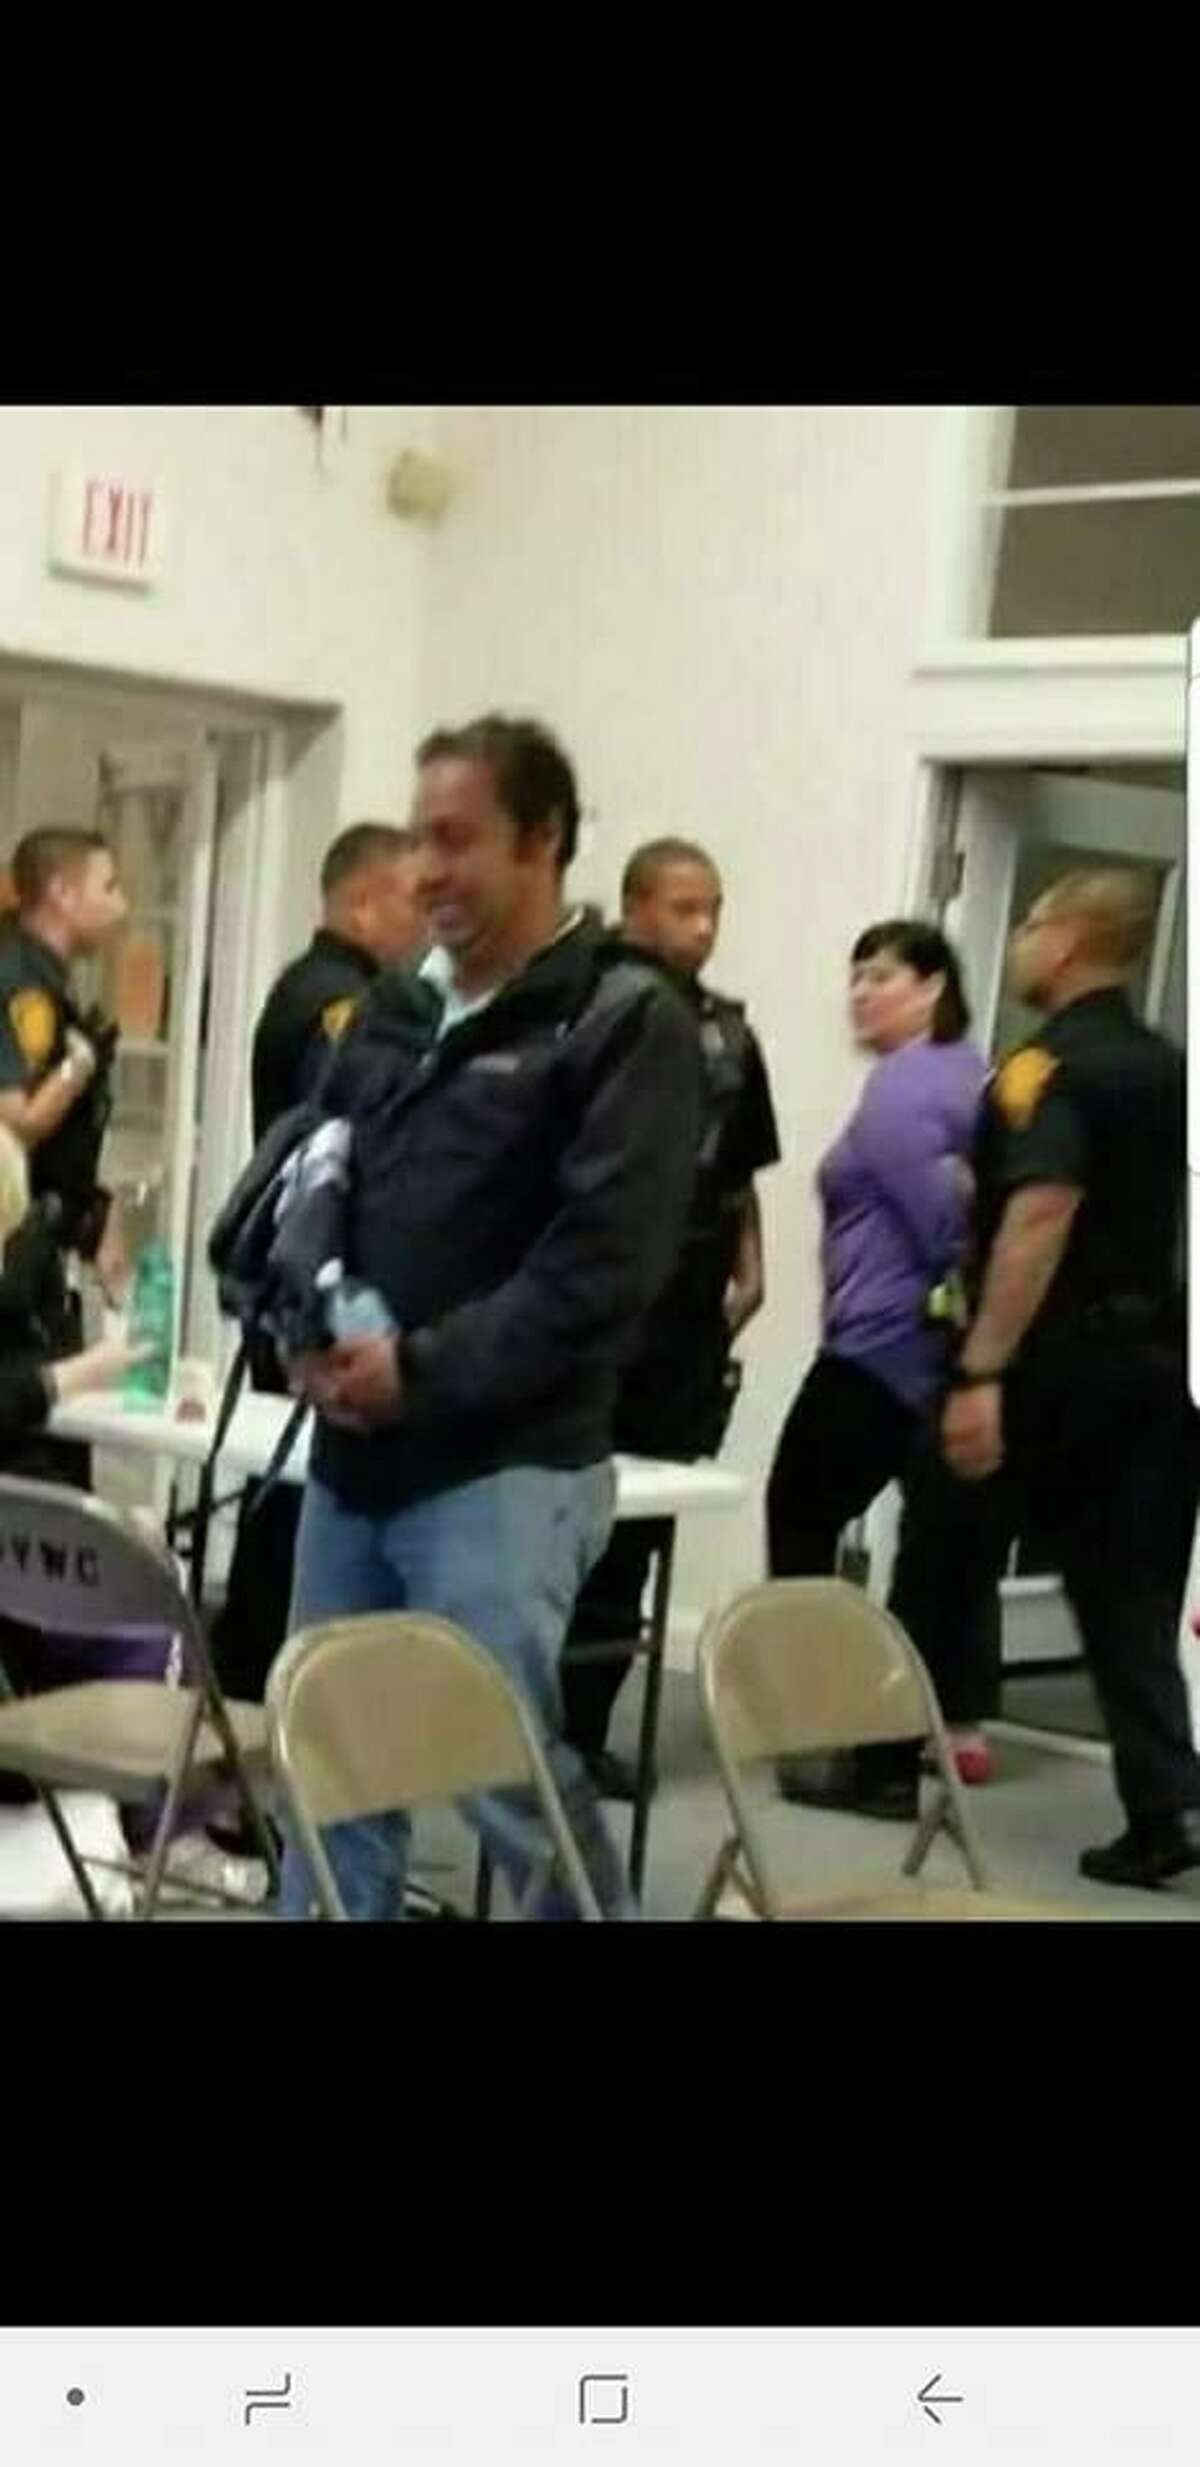 This is a blurry cellphone photo showing Bridgeport School Board member Maria Pereira being led away by police at a meeting of Success Village residents Tuesday night, Sept. 11, 2018